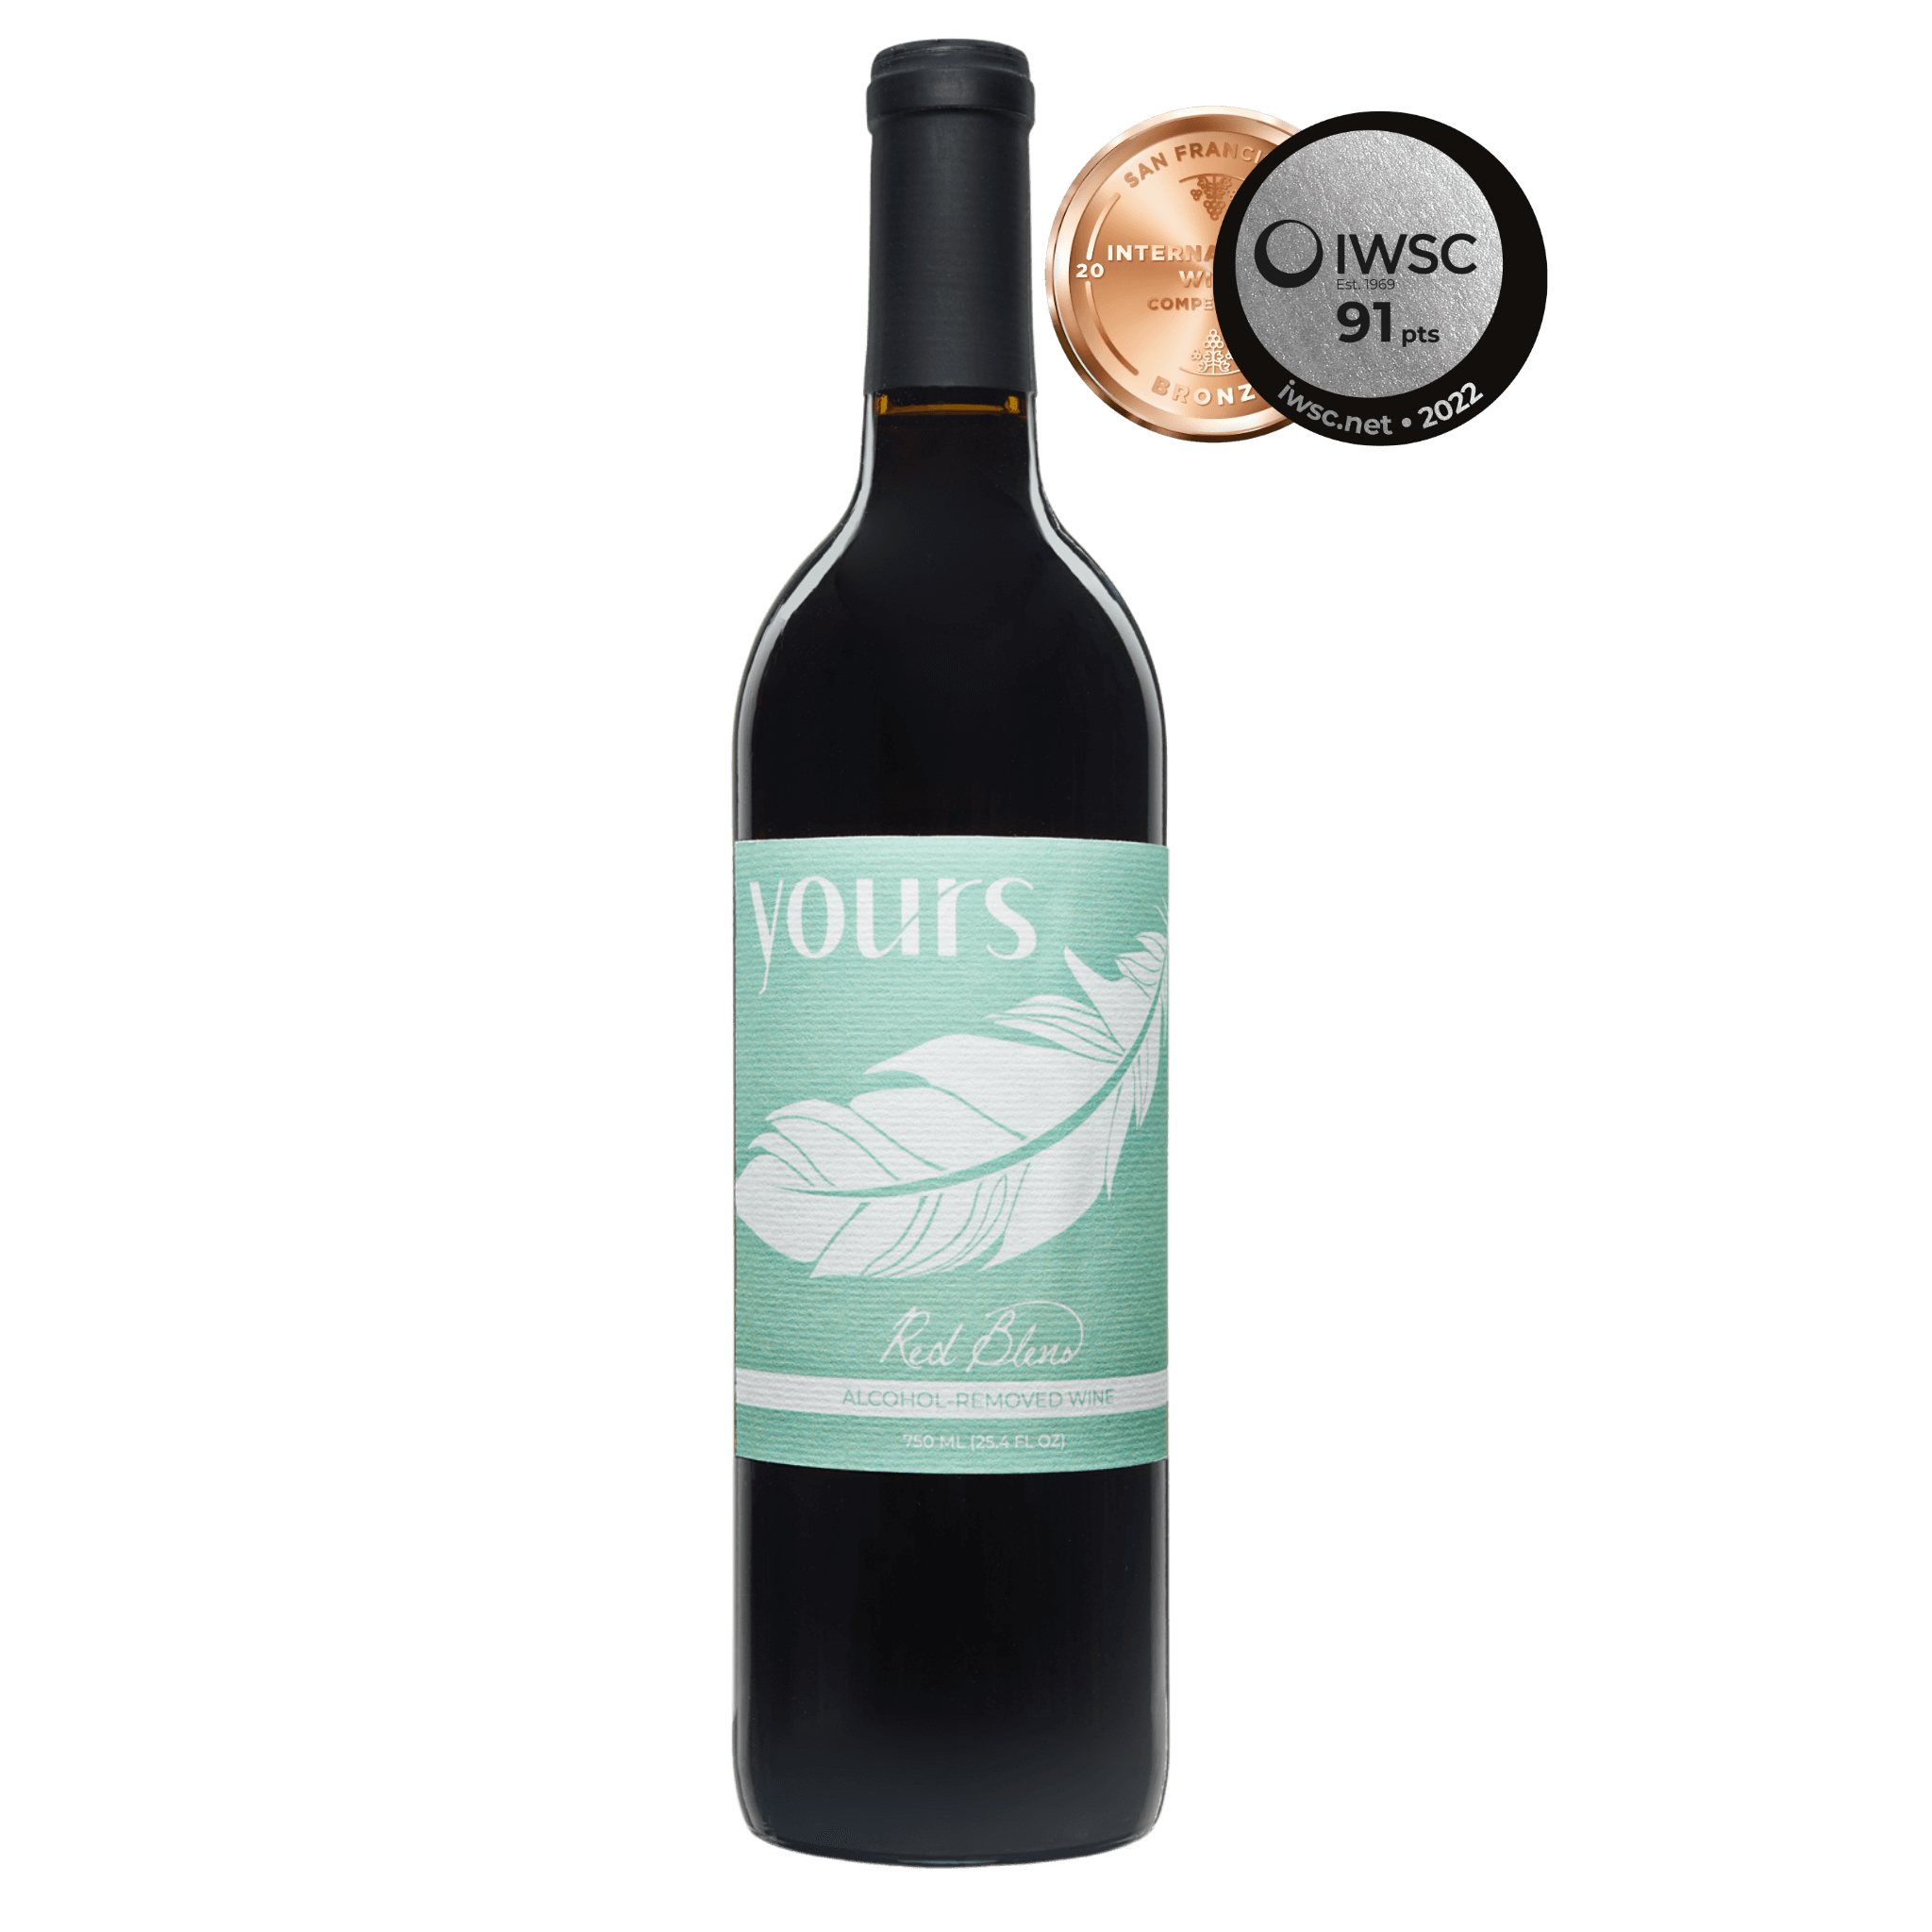 YOURS Non-Alcoholic Award Winning California Red Blend Wine